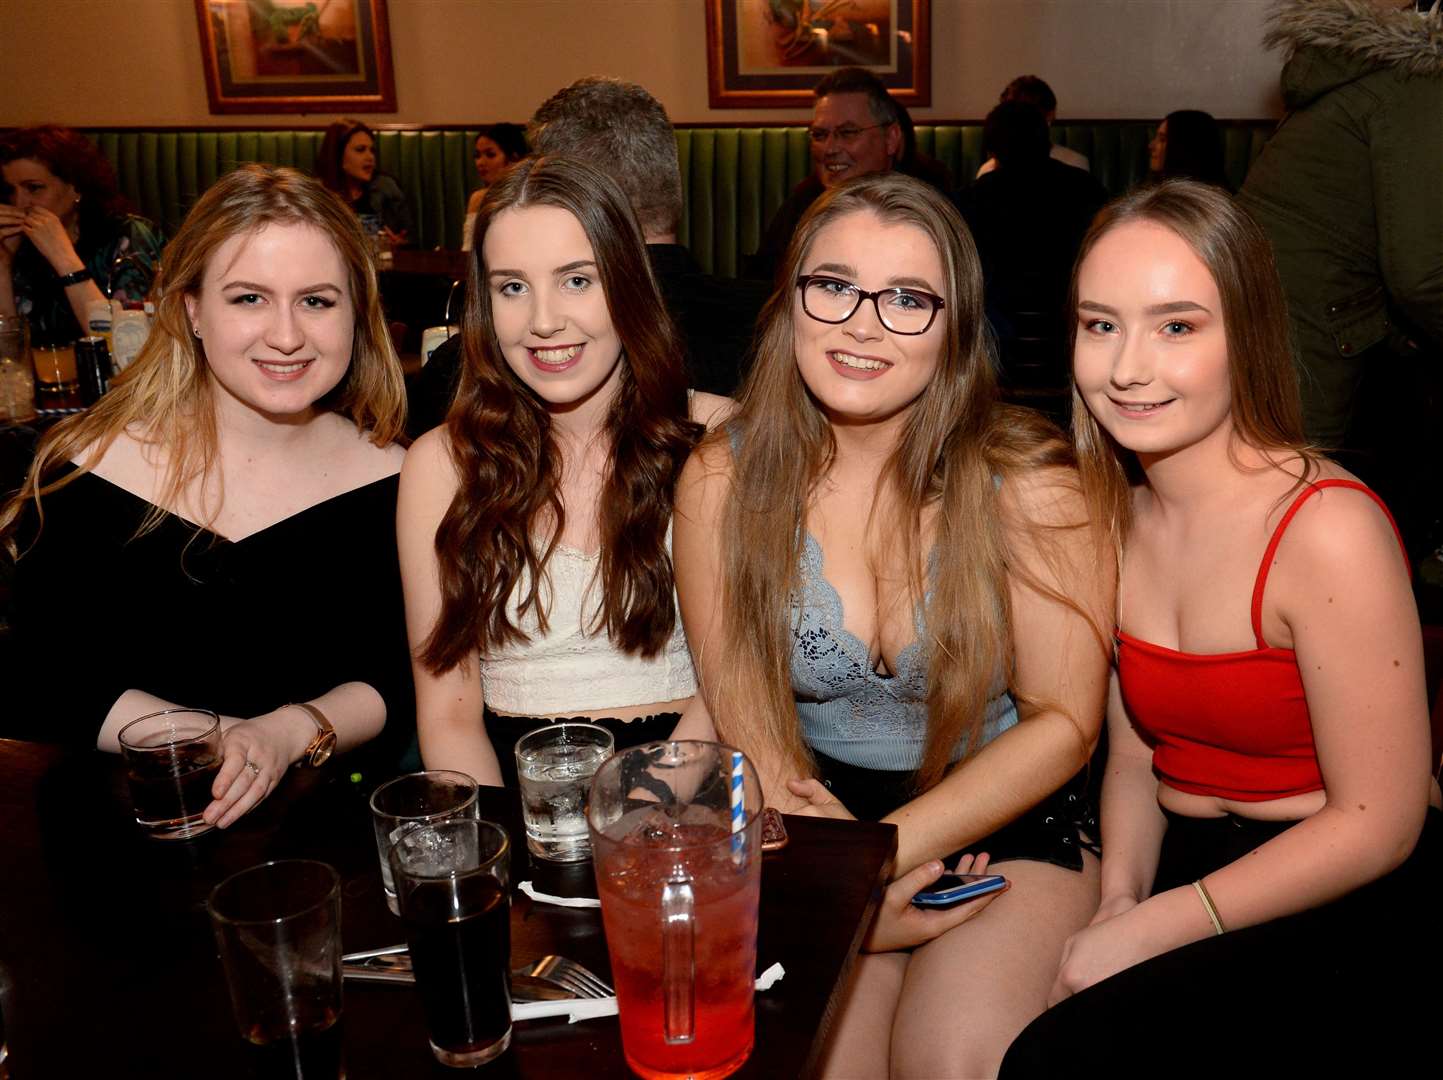 Celebrating finish of exams are Kirsty Campbell,Beth Spear,Lucy Weston and Kerri MacDonald.